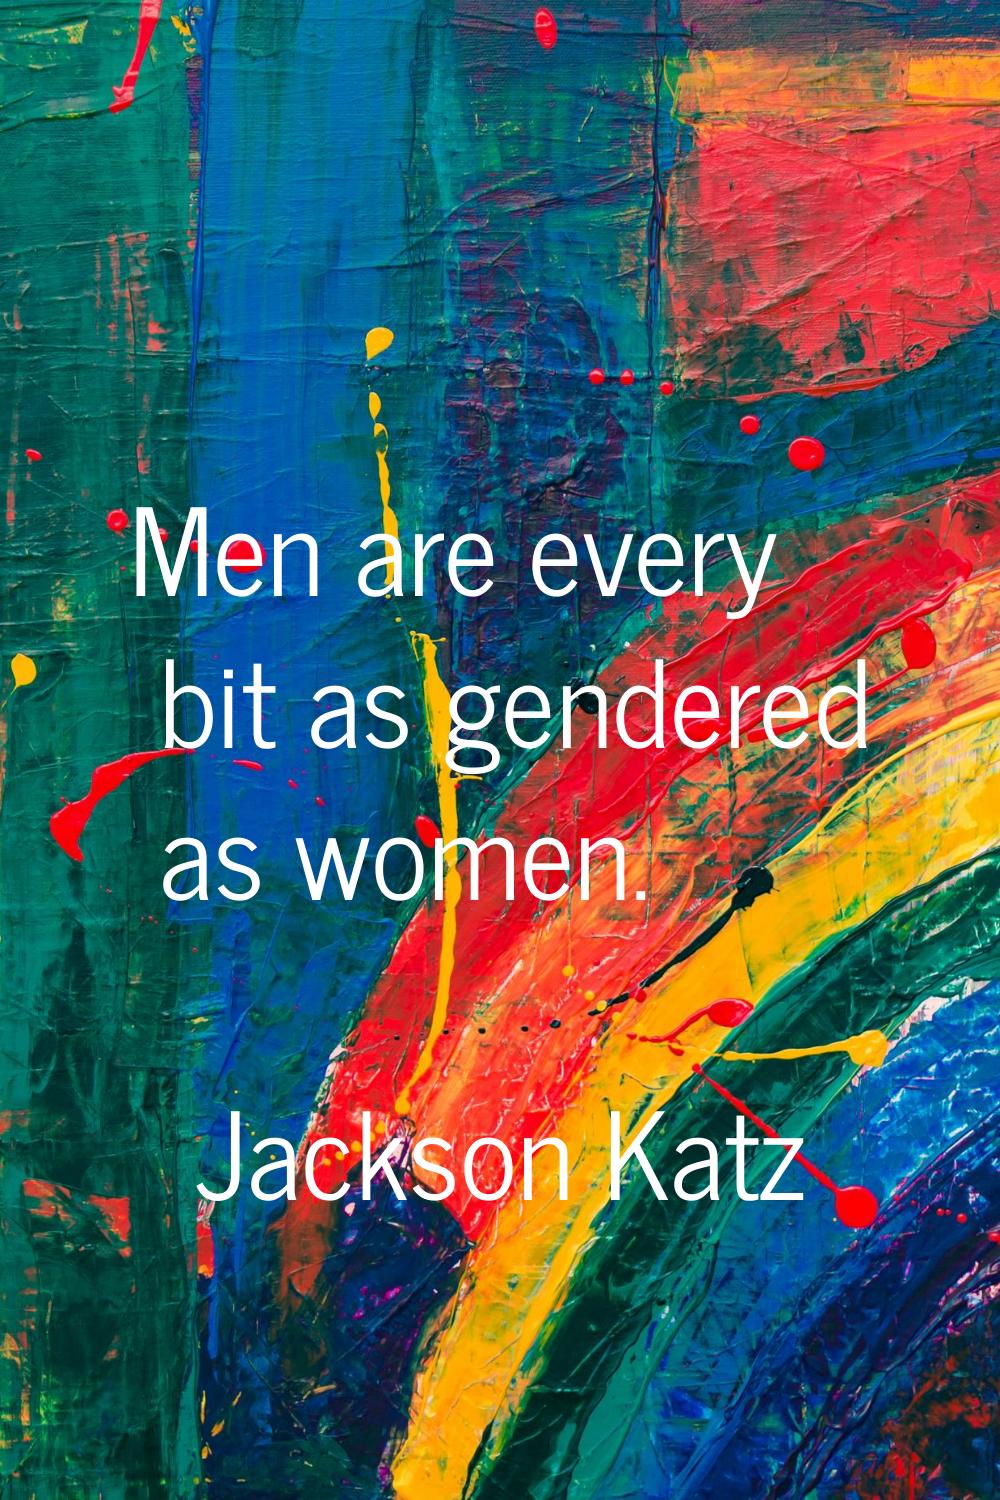 Men are every bit as gendered as women.